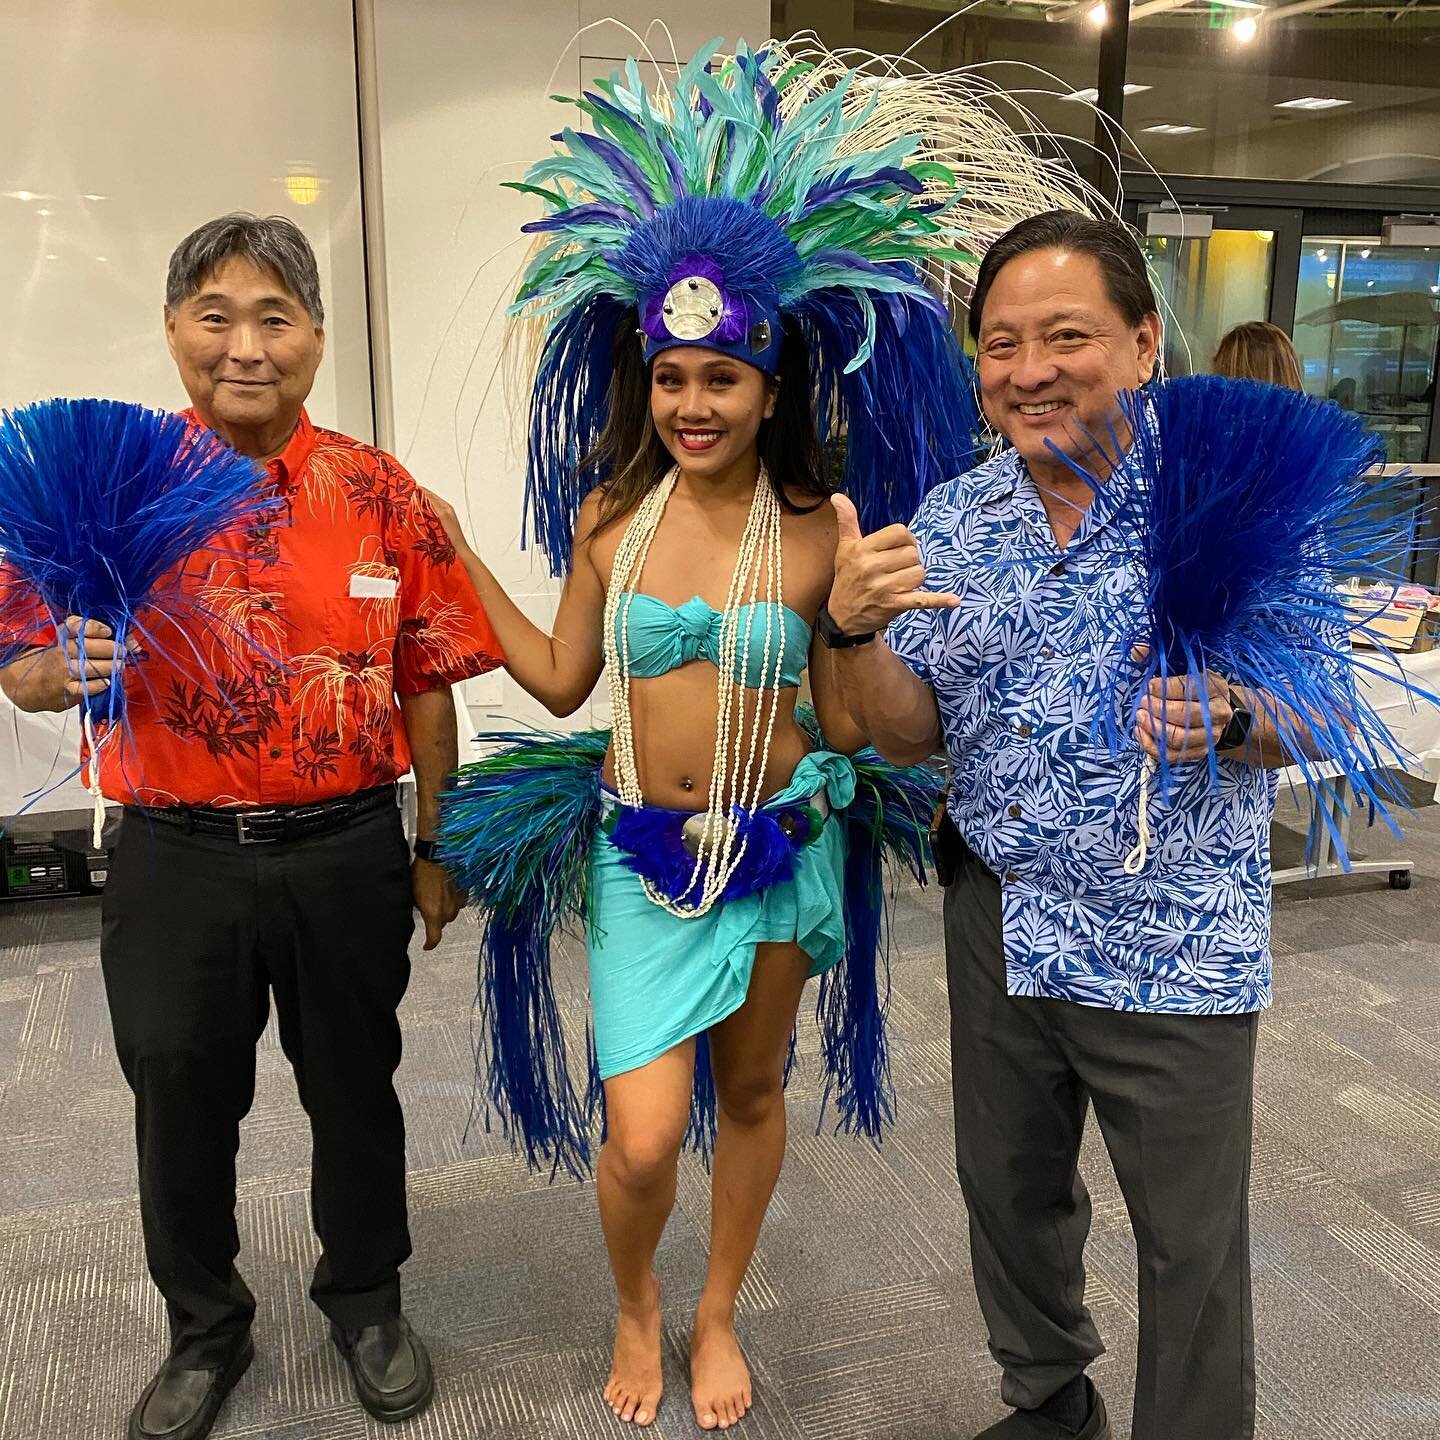 Aloha Friday Throwback! 
We had so much fun with Elite Mechanical.
Mahalo @chaddyboy45 for having our crew.
&bull;
&bull; Mahalo @alohahulasupply for our Costumes!
#CasinoNight #EliteMechanical #777 #Entertainers #Performers